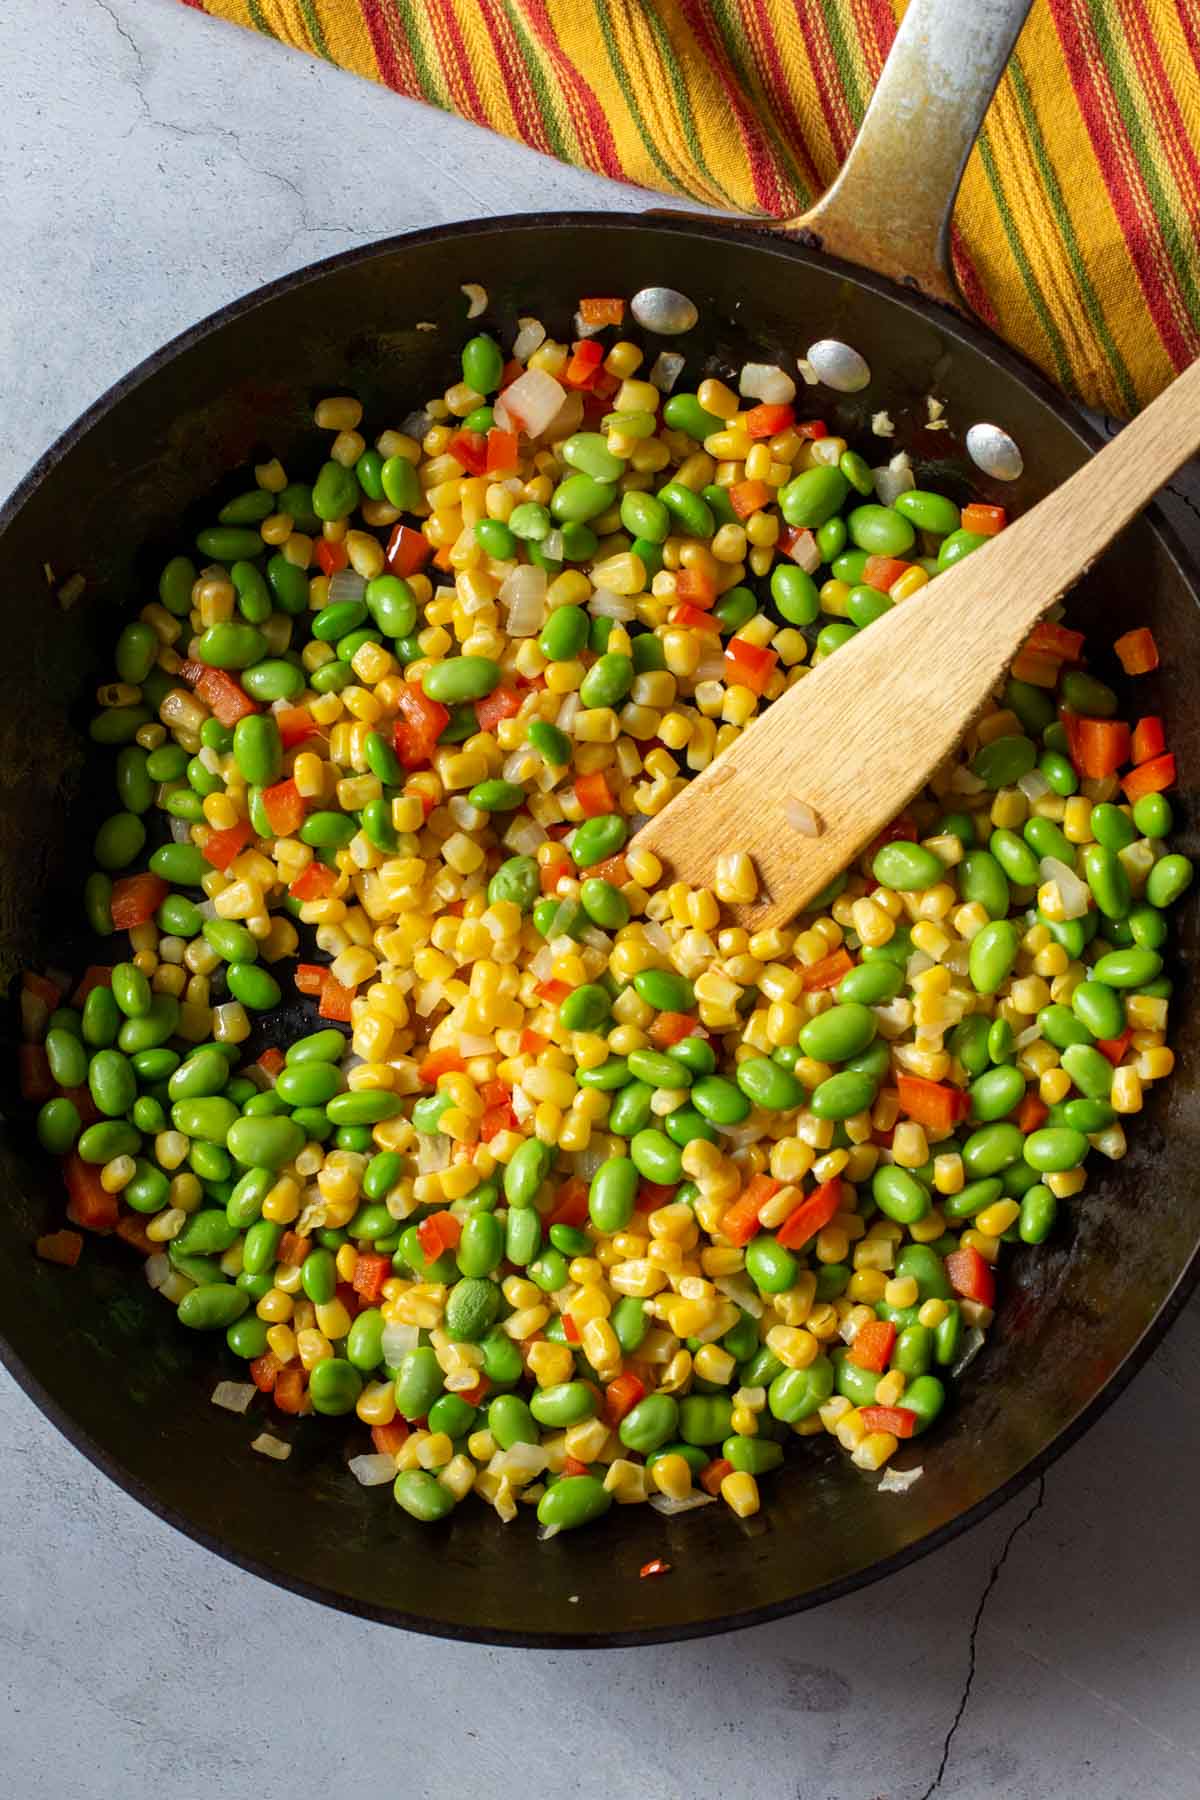 Cooking corn and edamame in a fry pan to make corn succotash.